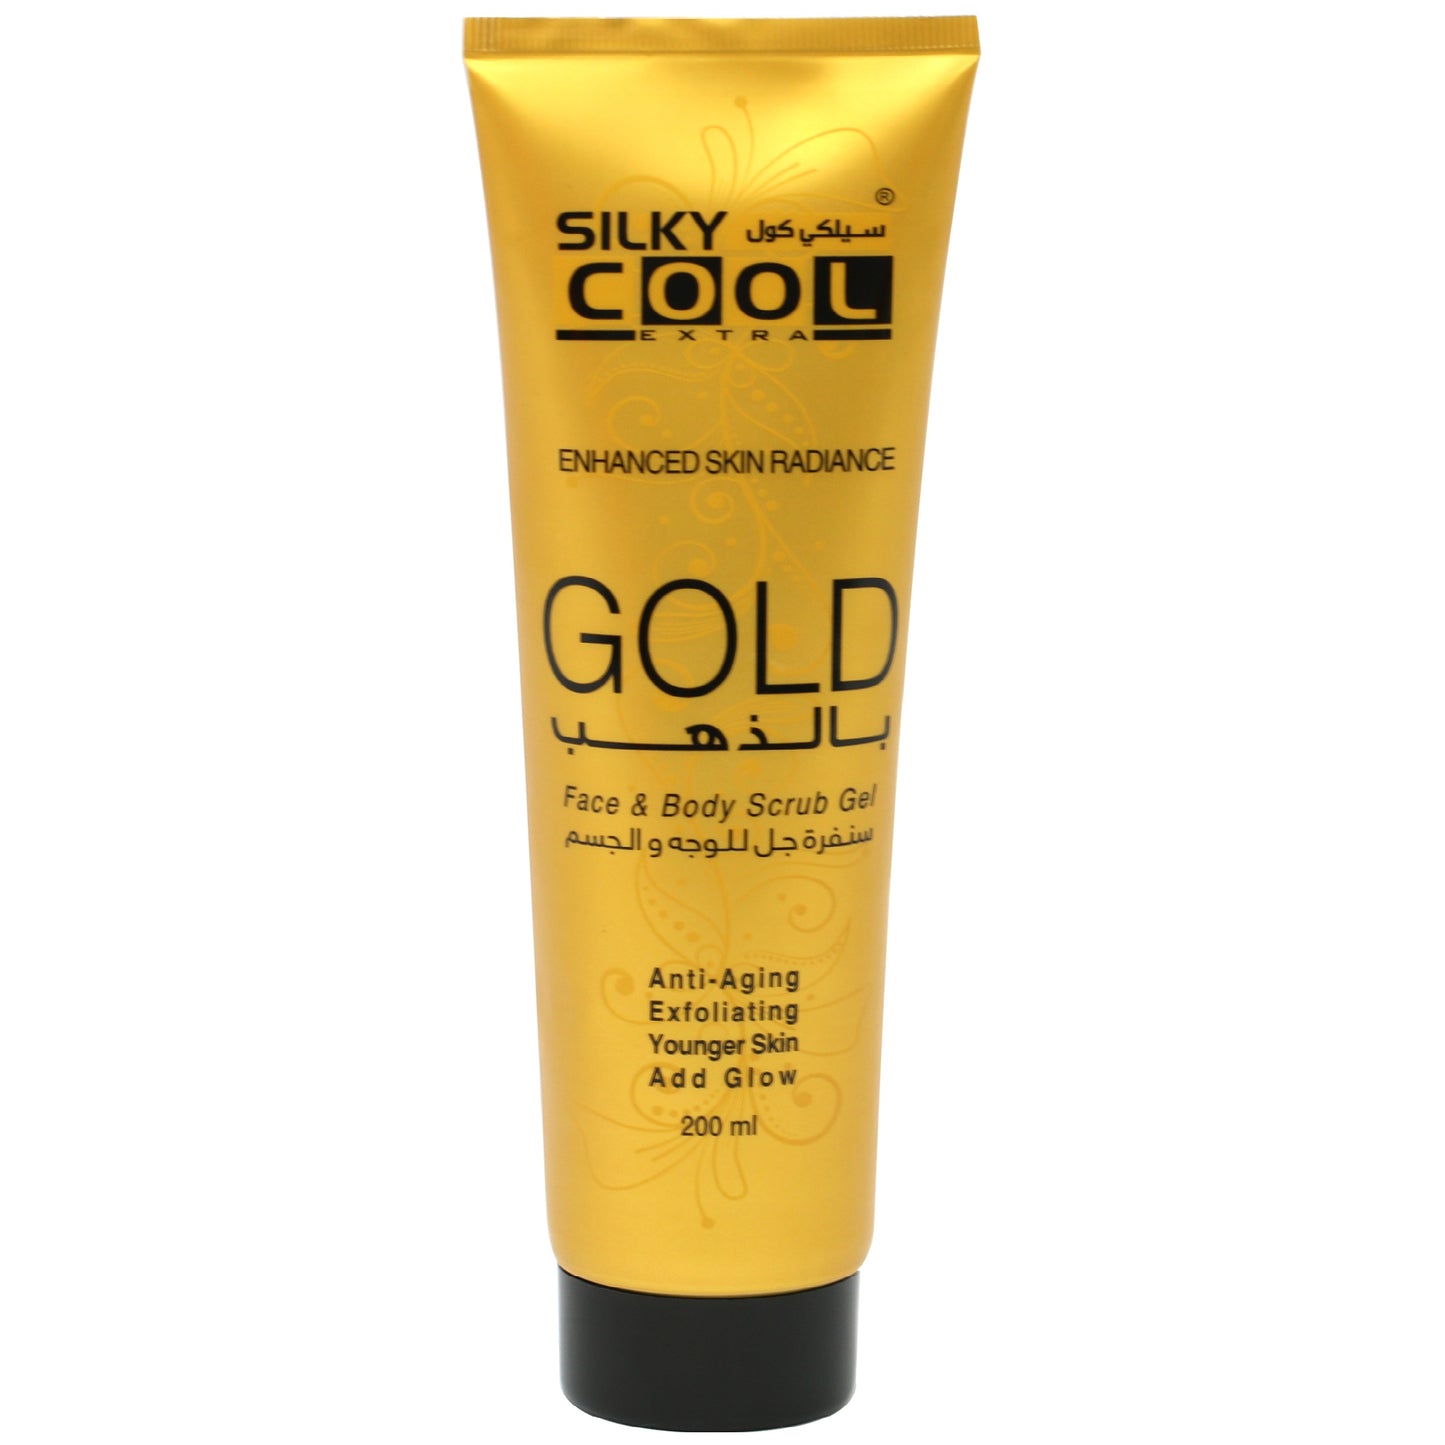 Gold-infused scrub for silky-smooth radiance (200 mL).